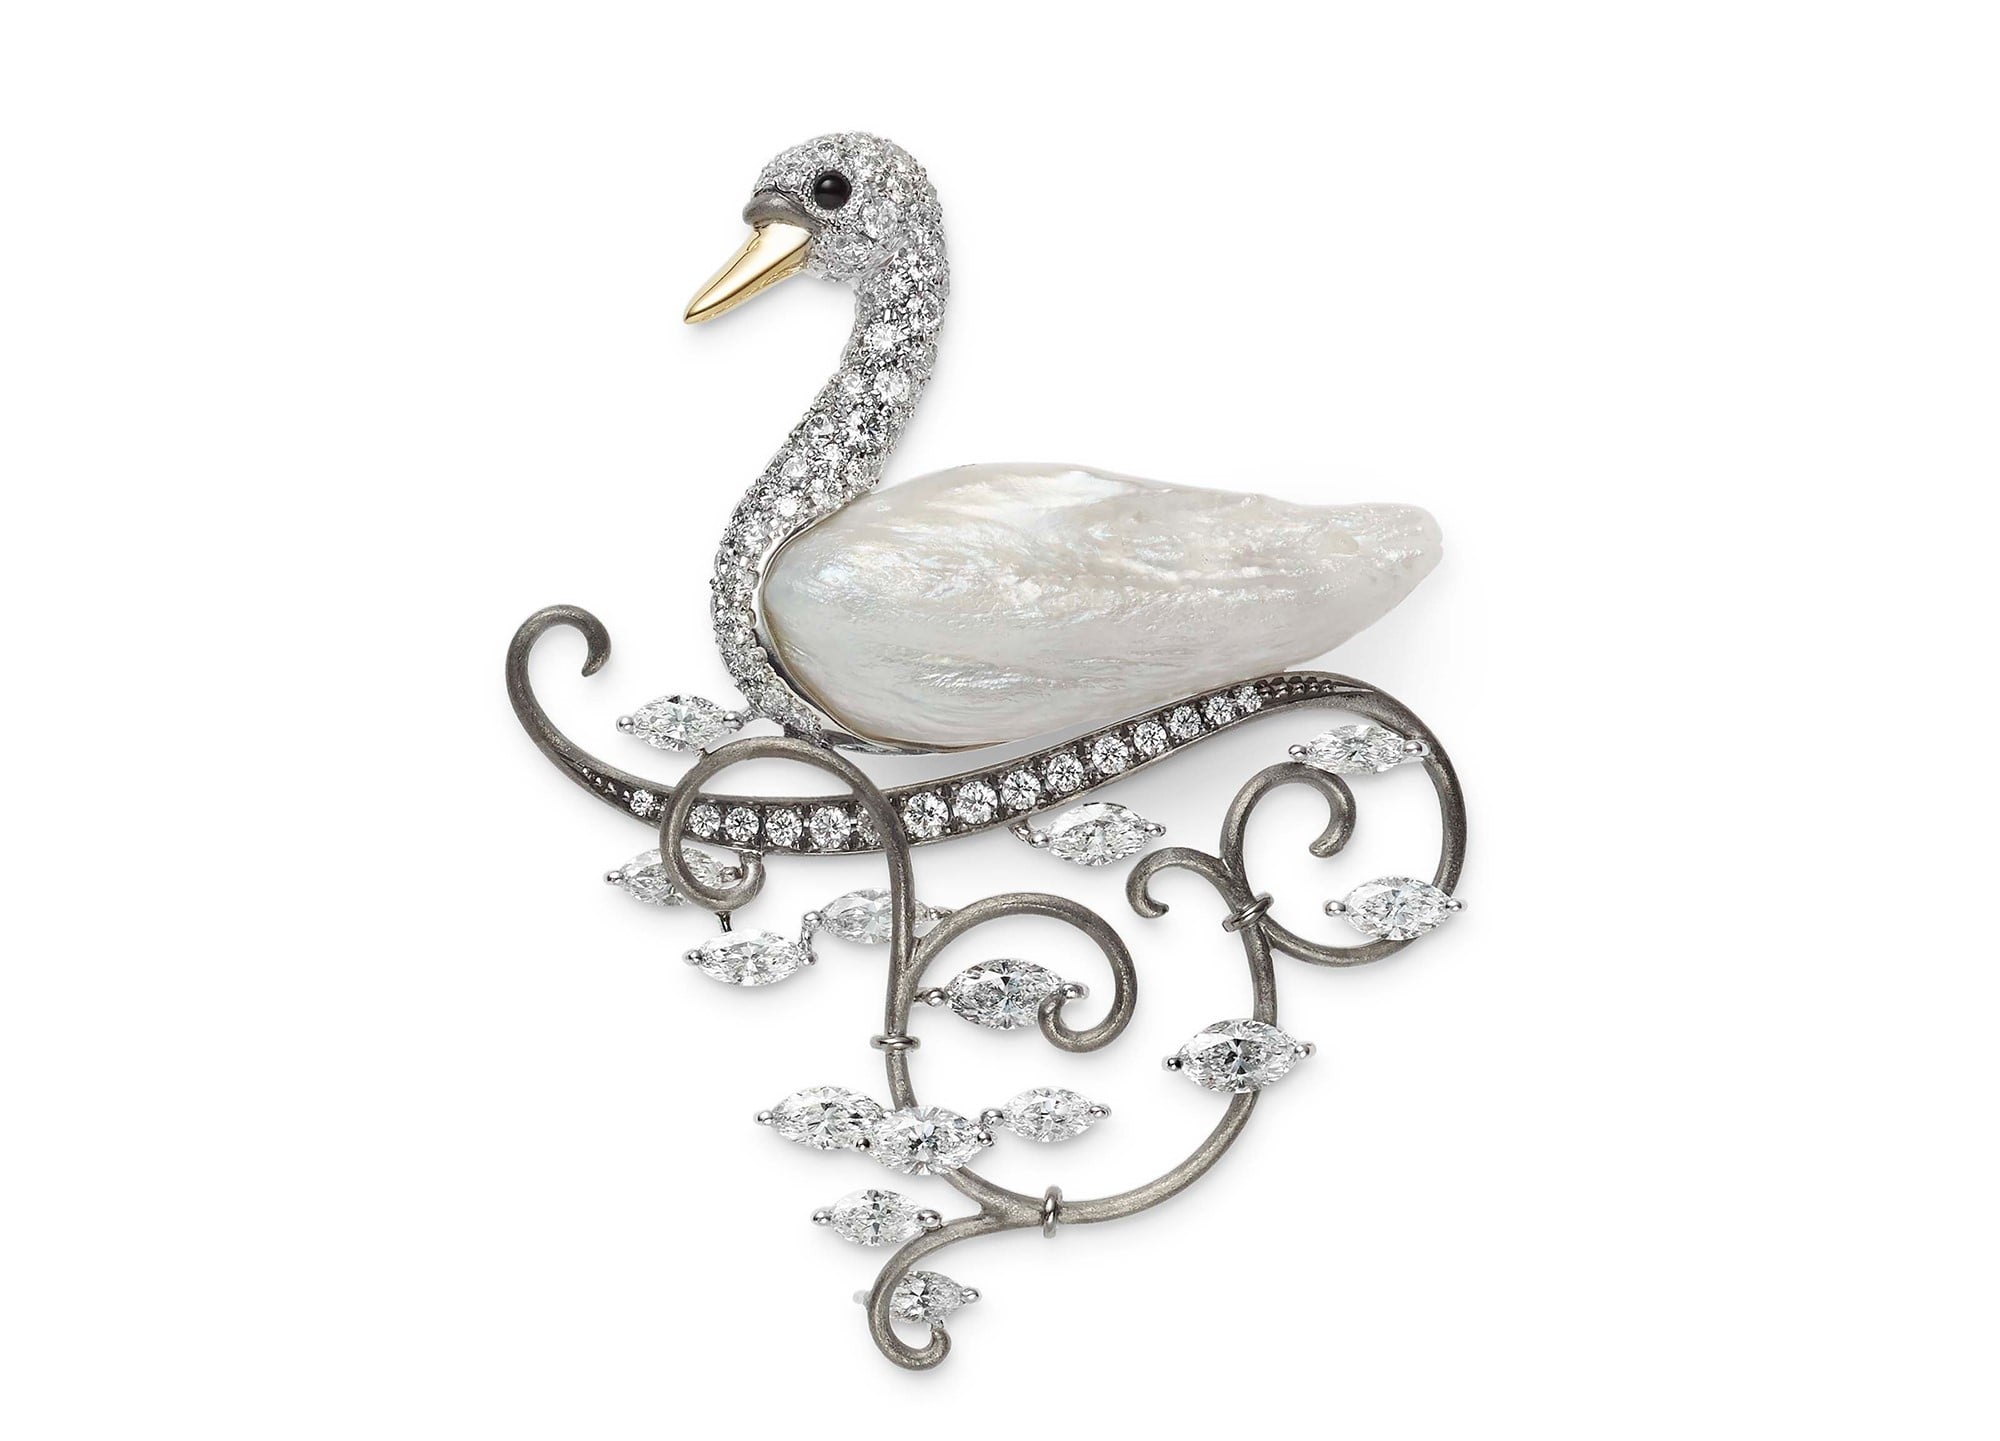 A swan brooch using natural freshwater pearls called “Feather Pearls”. The diamond represents the sunlight reflection from the lake water surface.